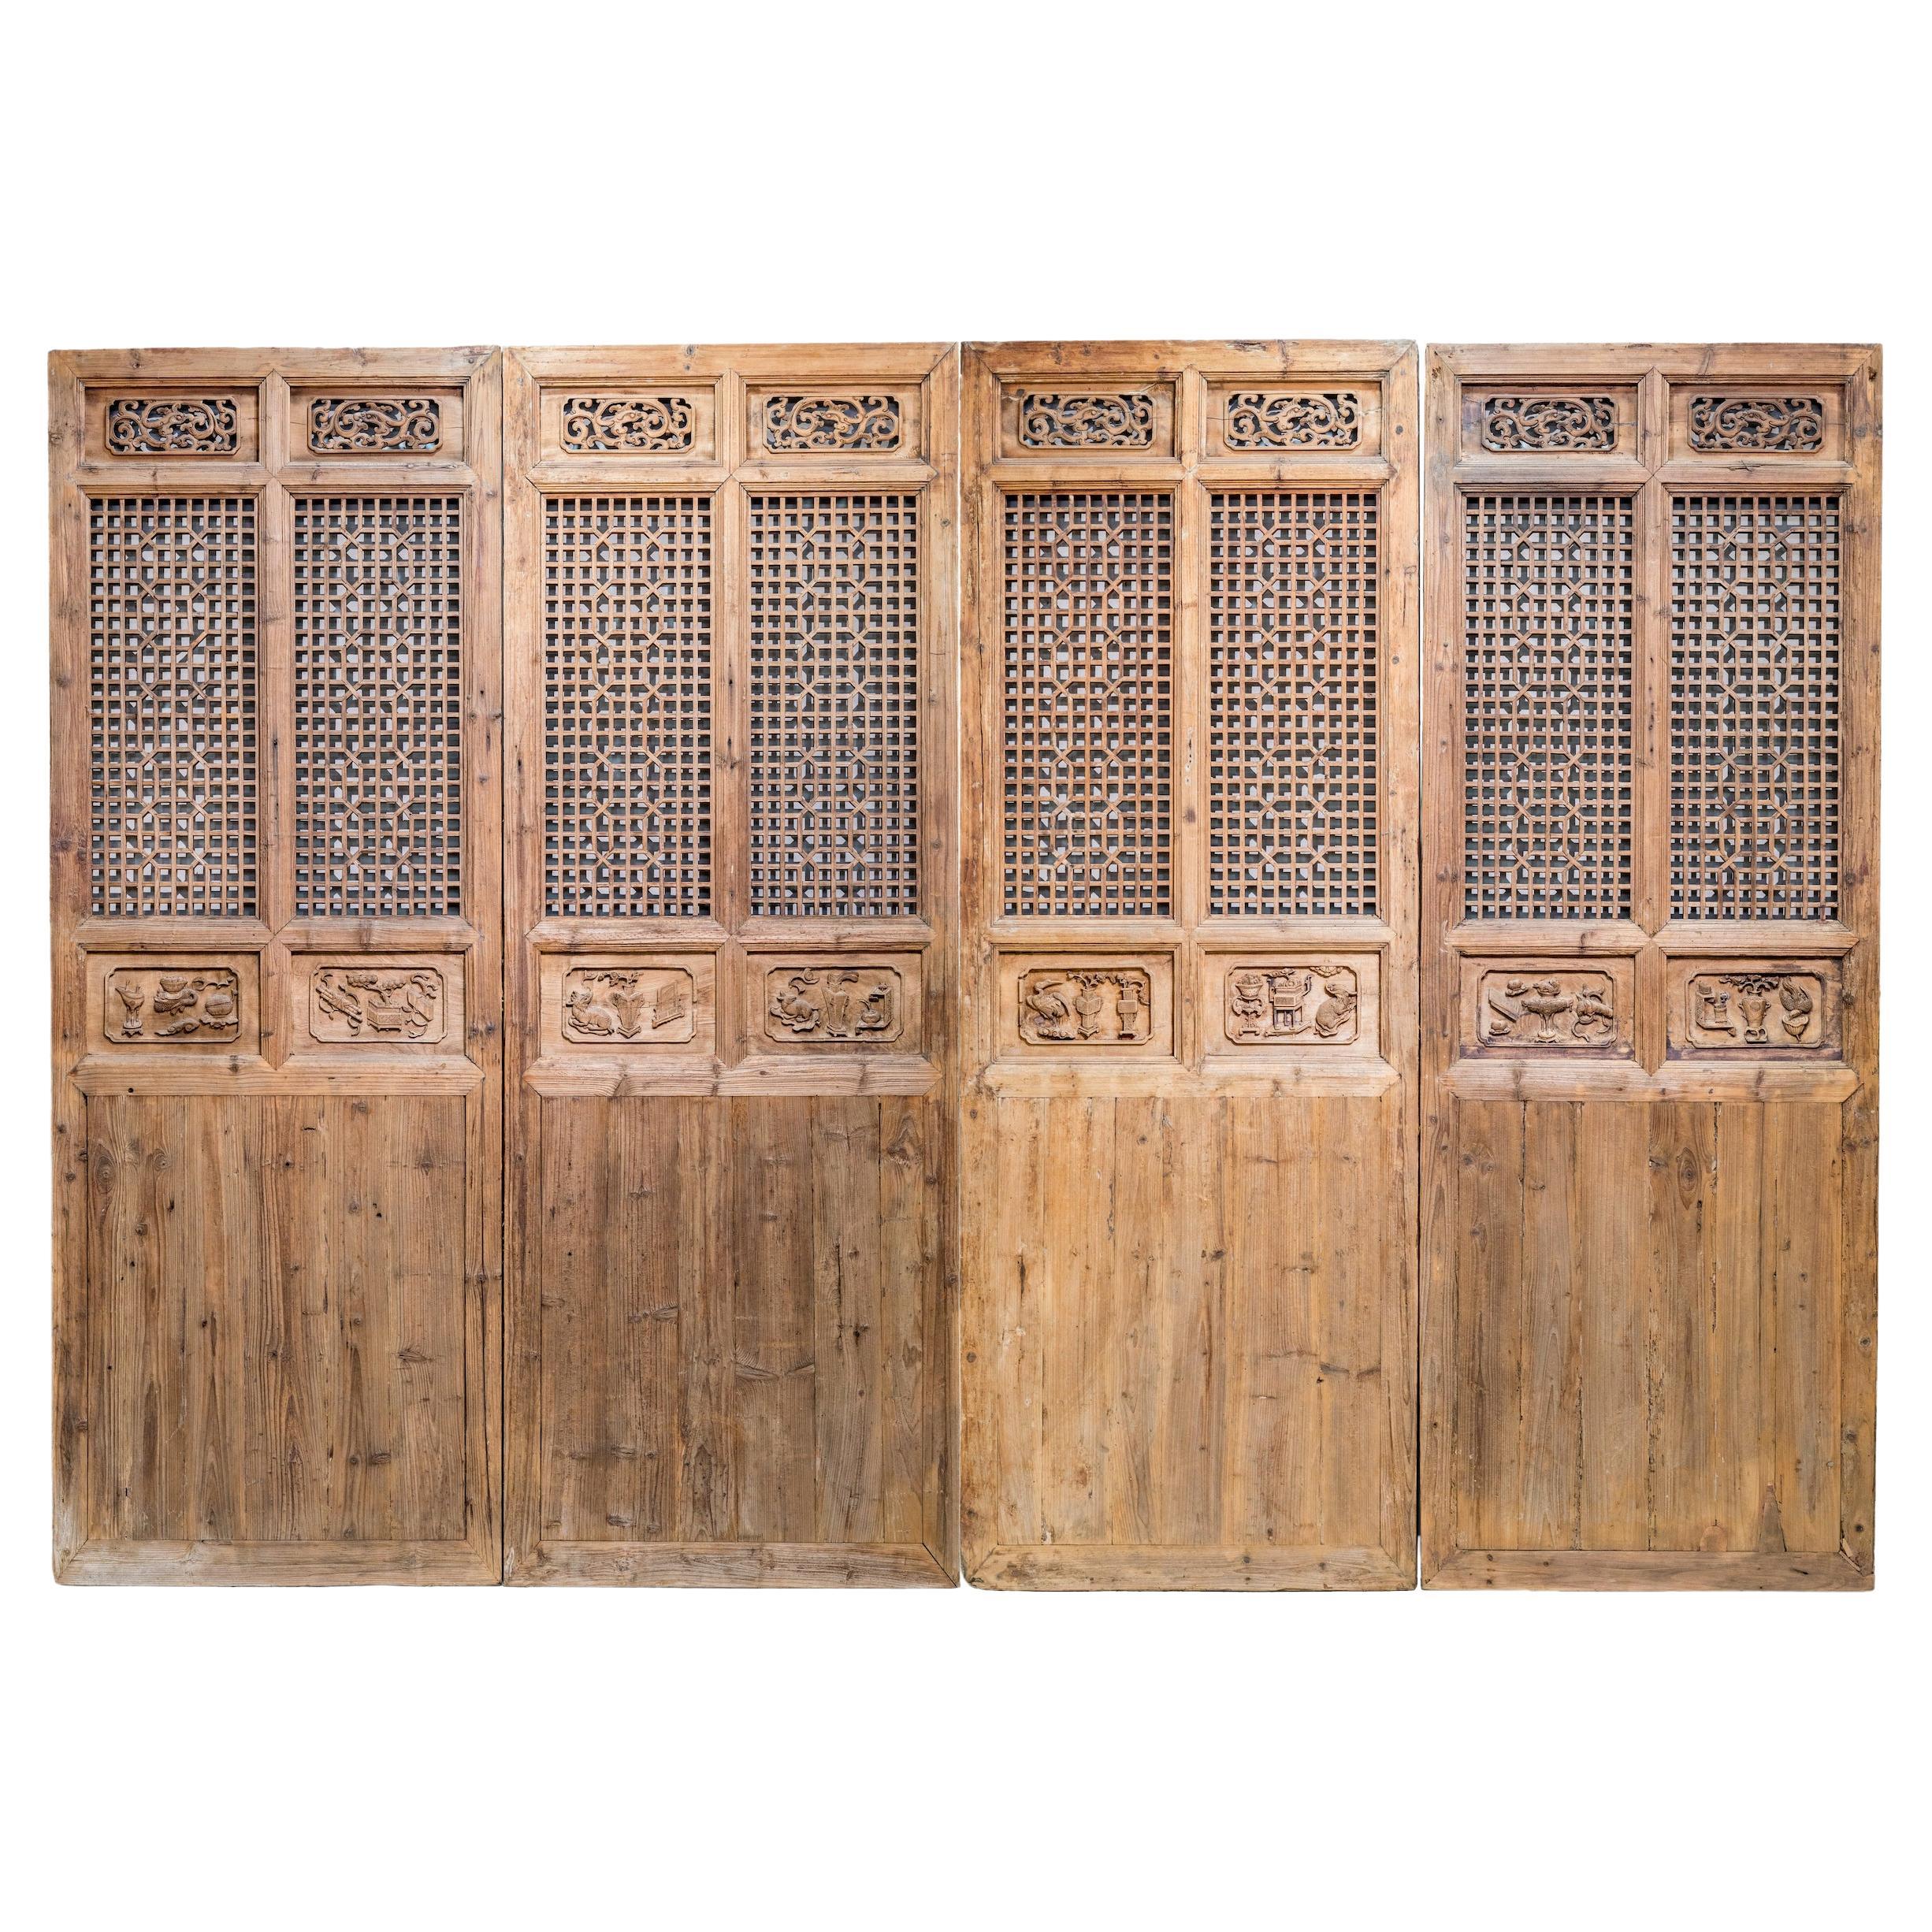 Late 19th Century Door Panels with Carving and Latticework For Sale